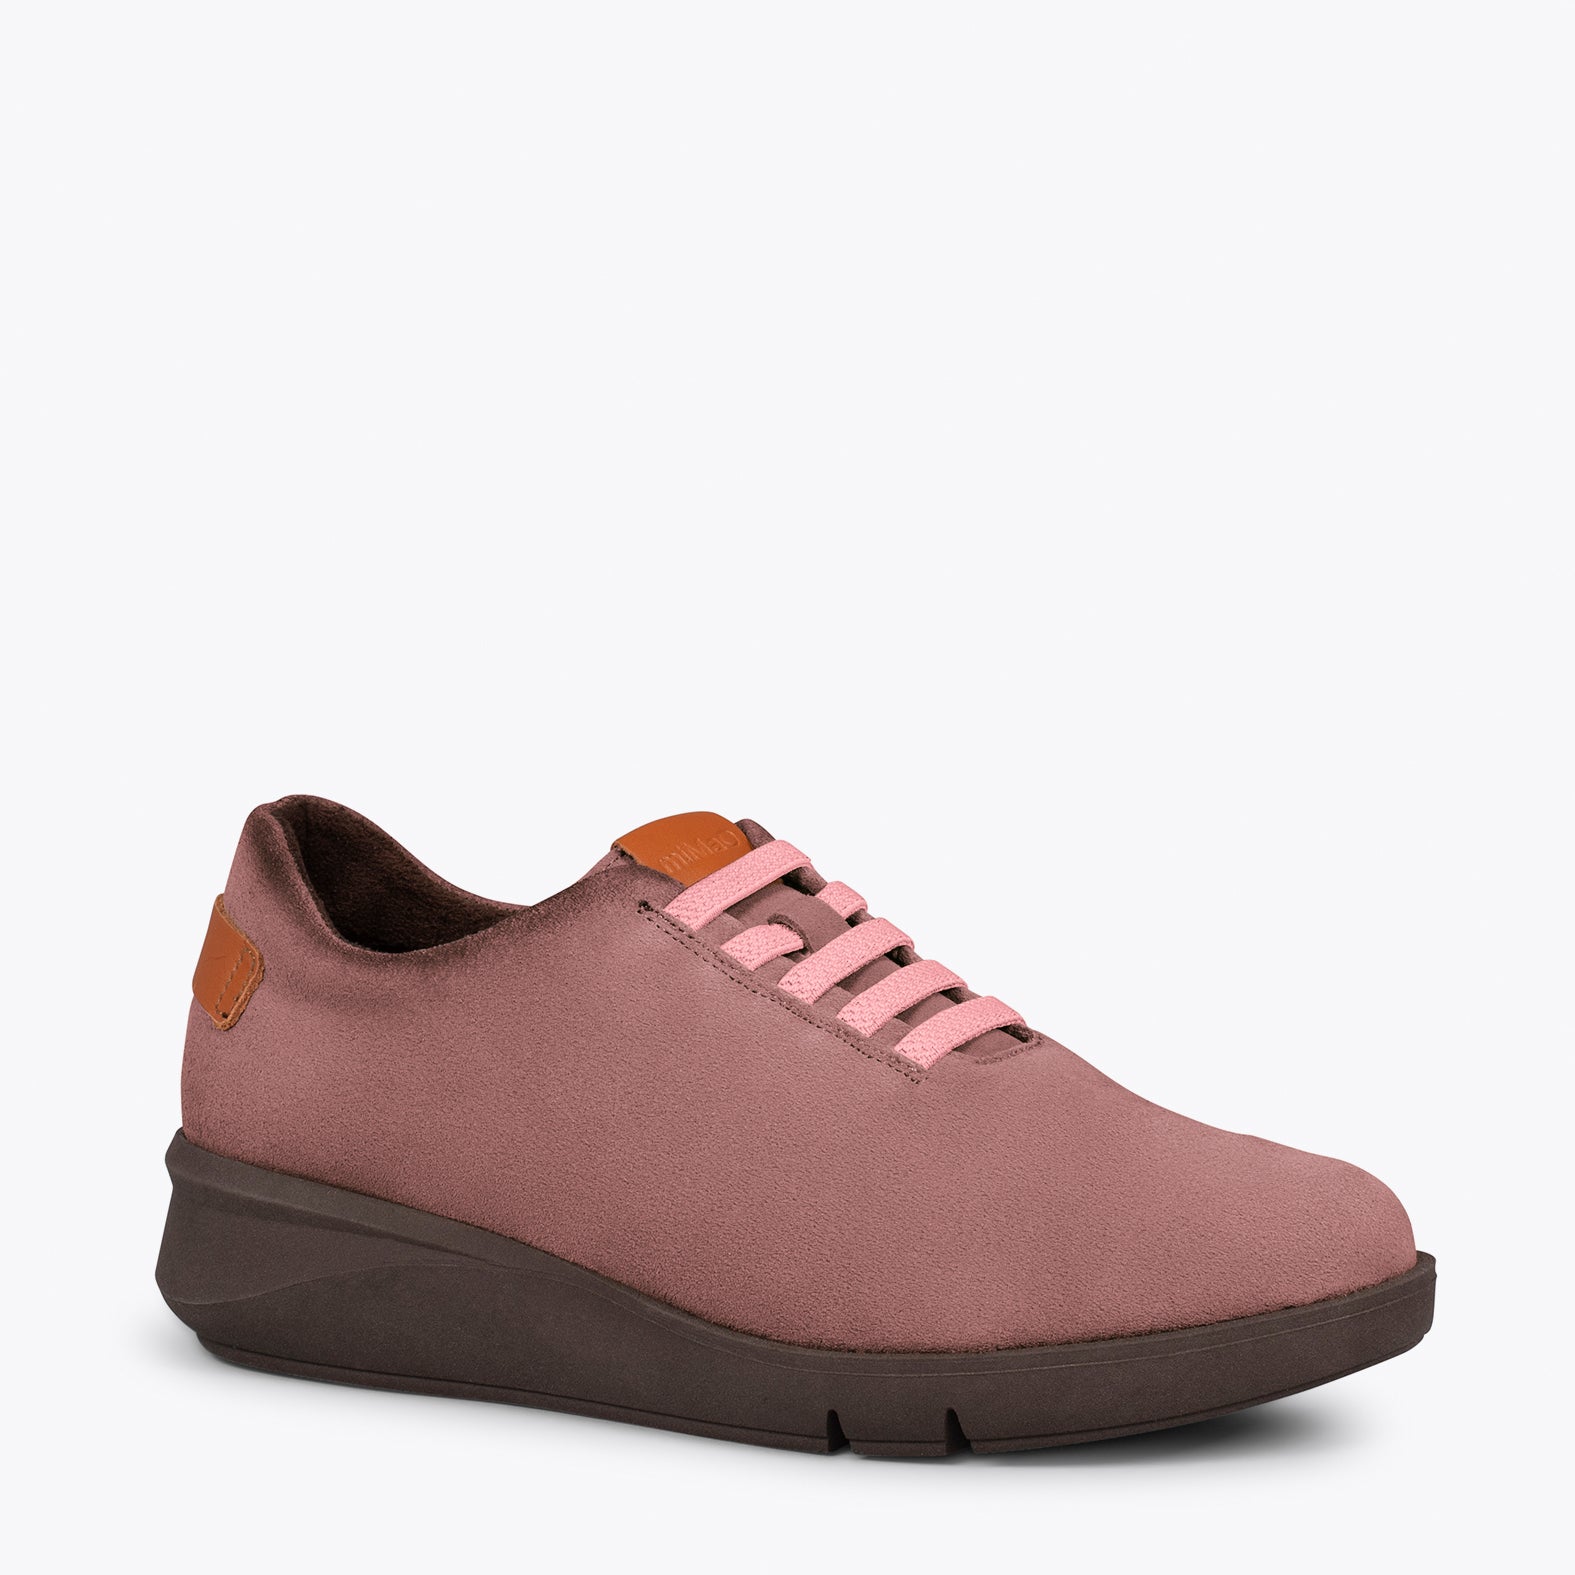 FLY – PINK casual sneaker with elastic laces